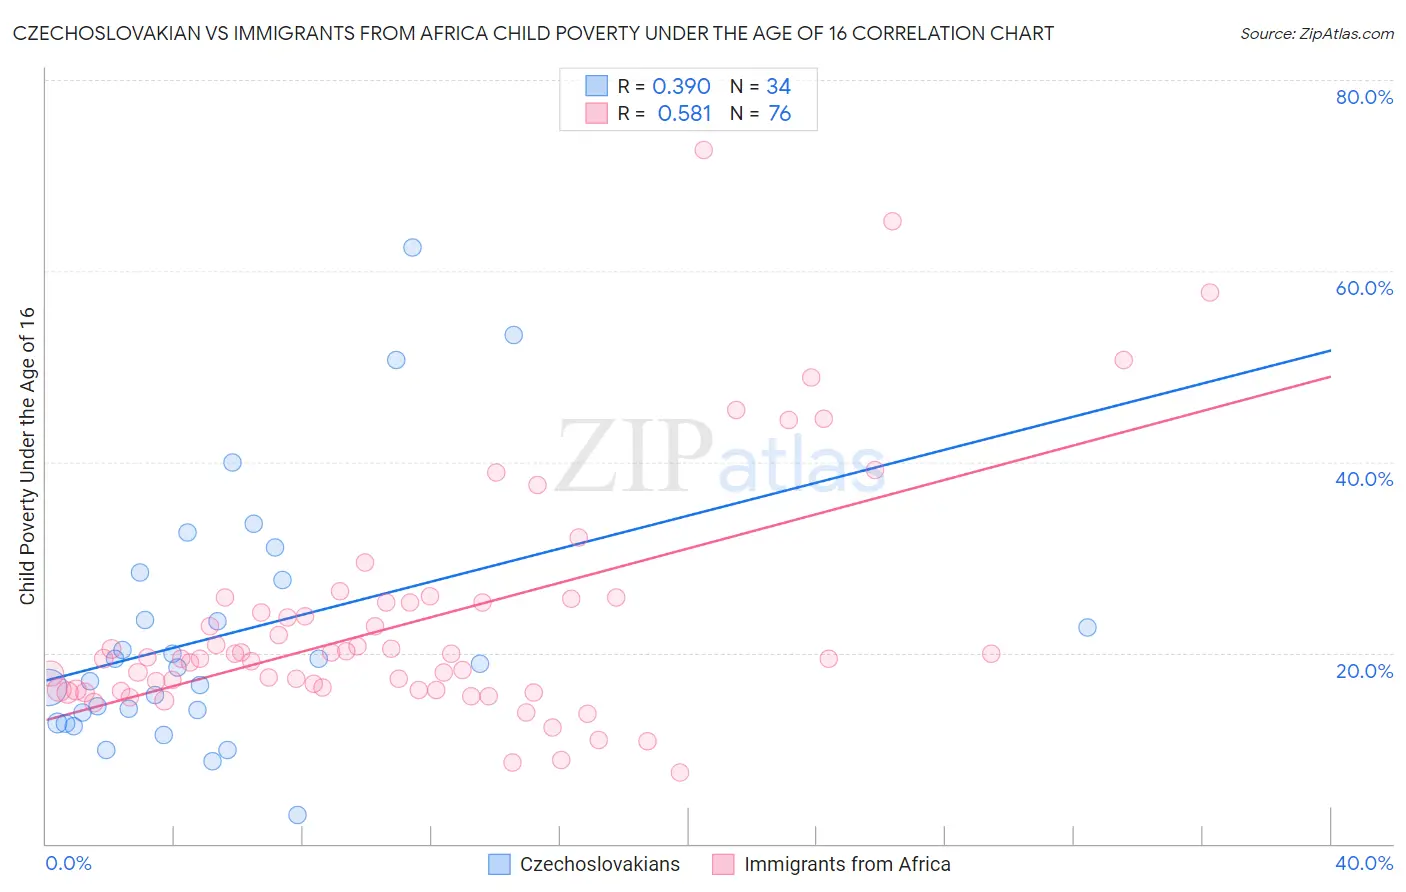 Czechoslovakian vs Immigrants from Africa Child Poverty Under the Age of 16